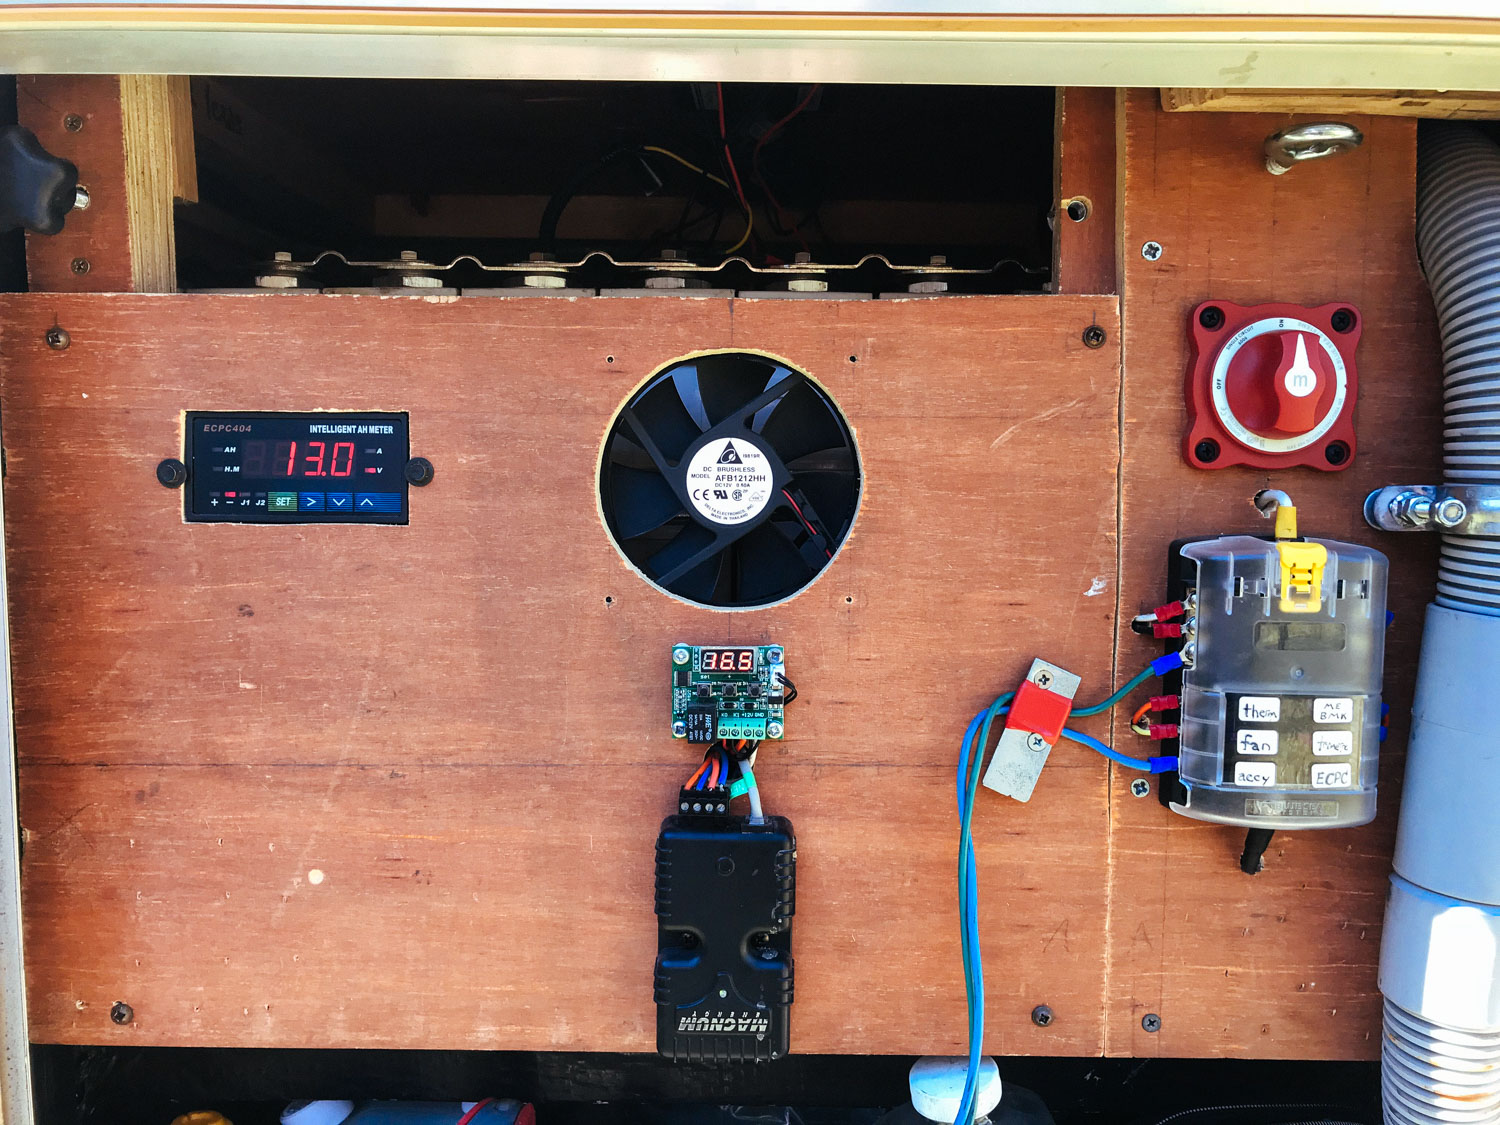  This is the first edition of our "BMS panel" (battery management system), mounted on plywood from the battery shipping crate! 